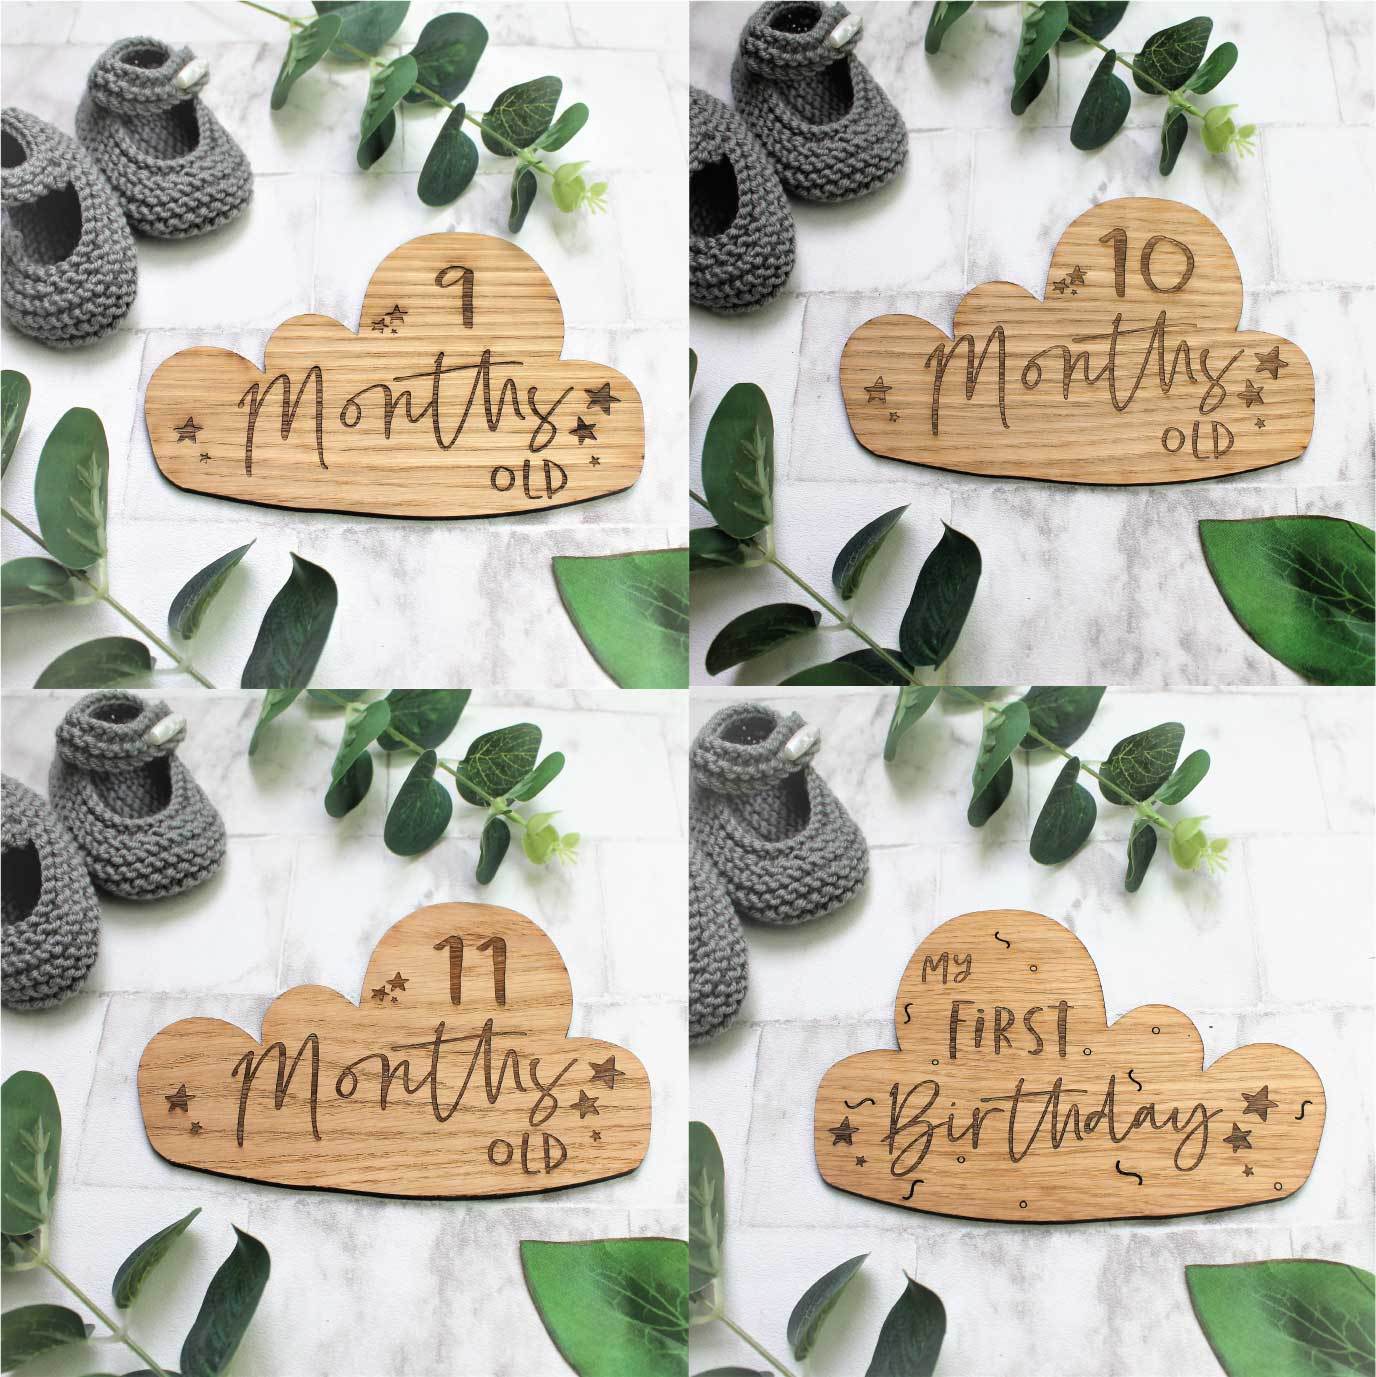 9, 10, 11 months old, and my first birthday cloud shaped engraved baby milestone cards 